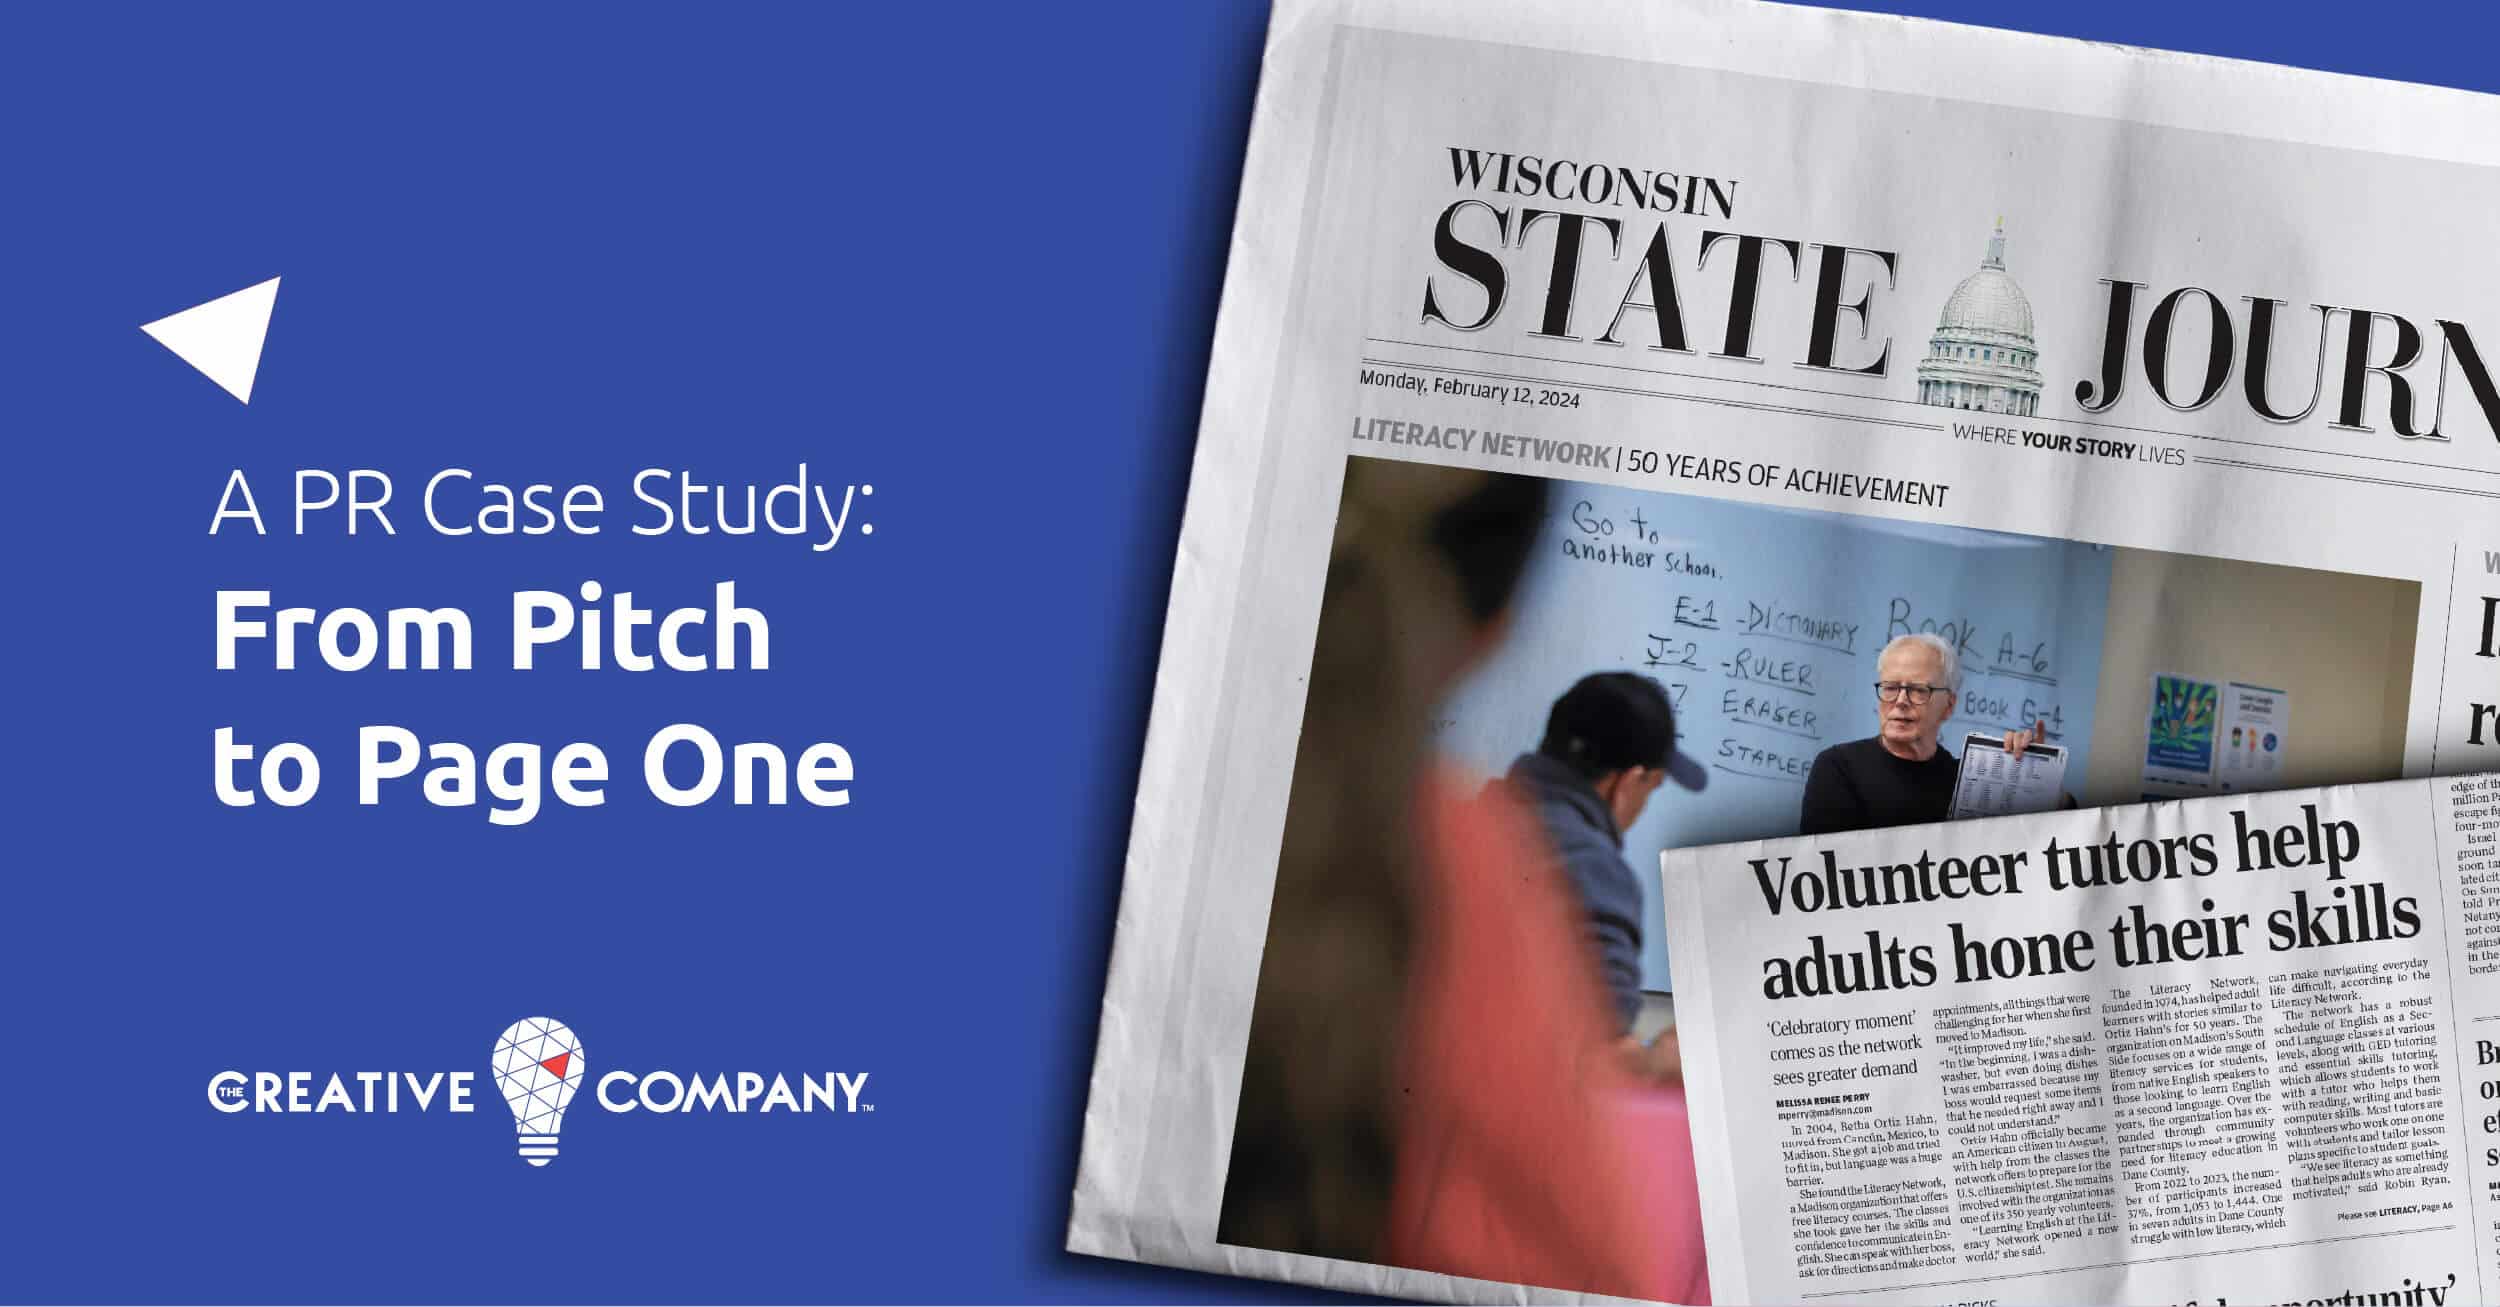 A PR Case Study: From Pitch to Page One graphic with Photos of The front page of the State Journal from February 12, 2024 and a photo of the article.